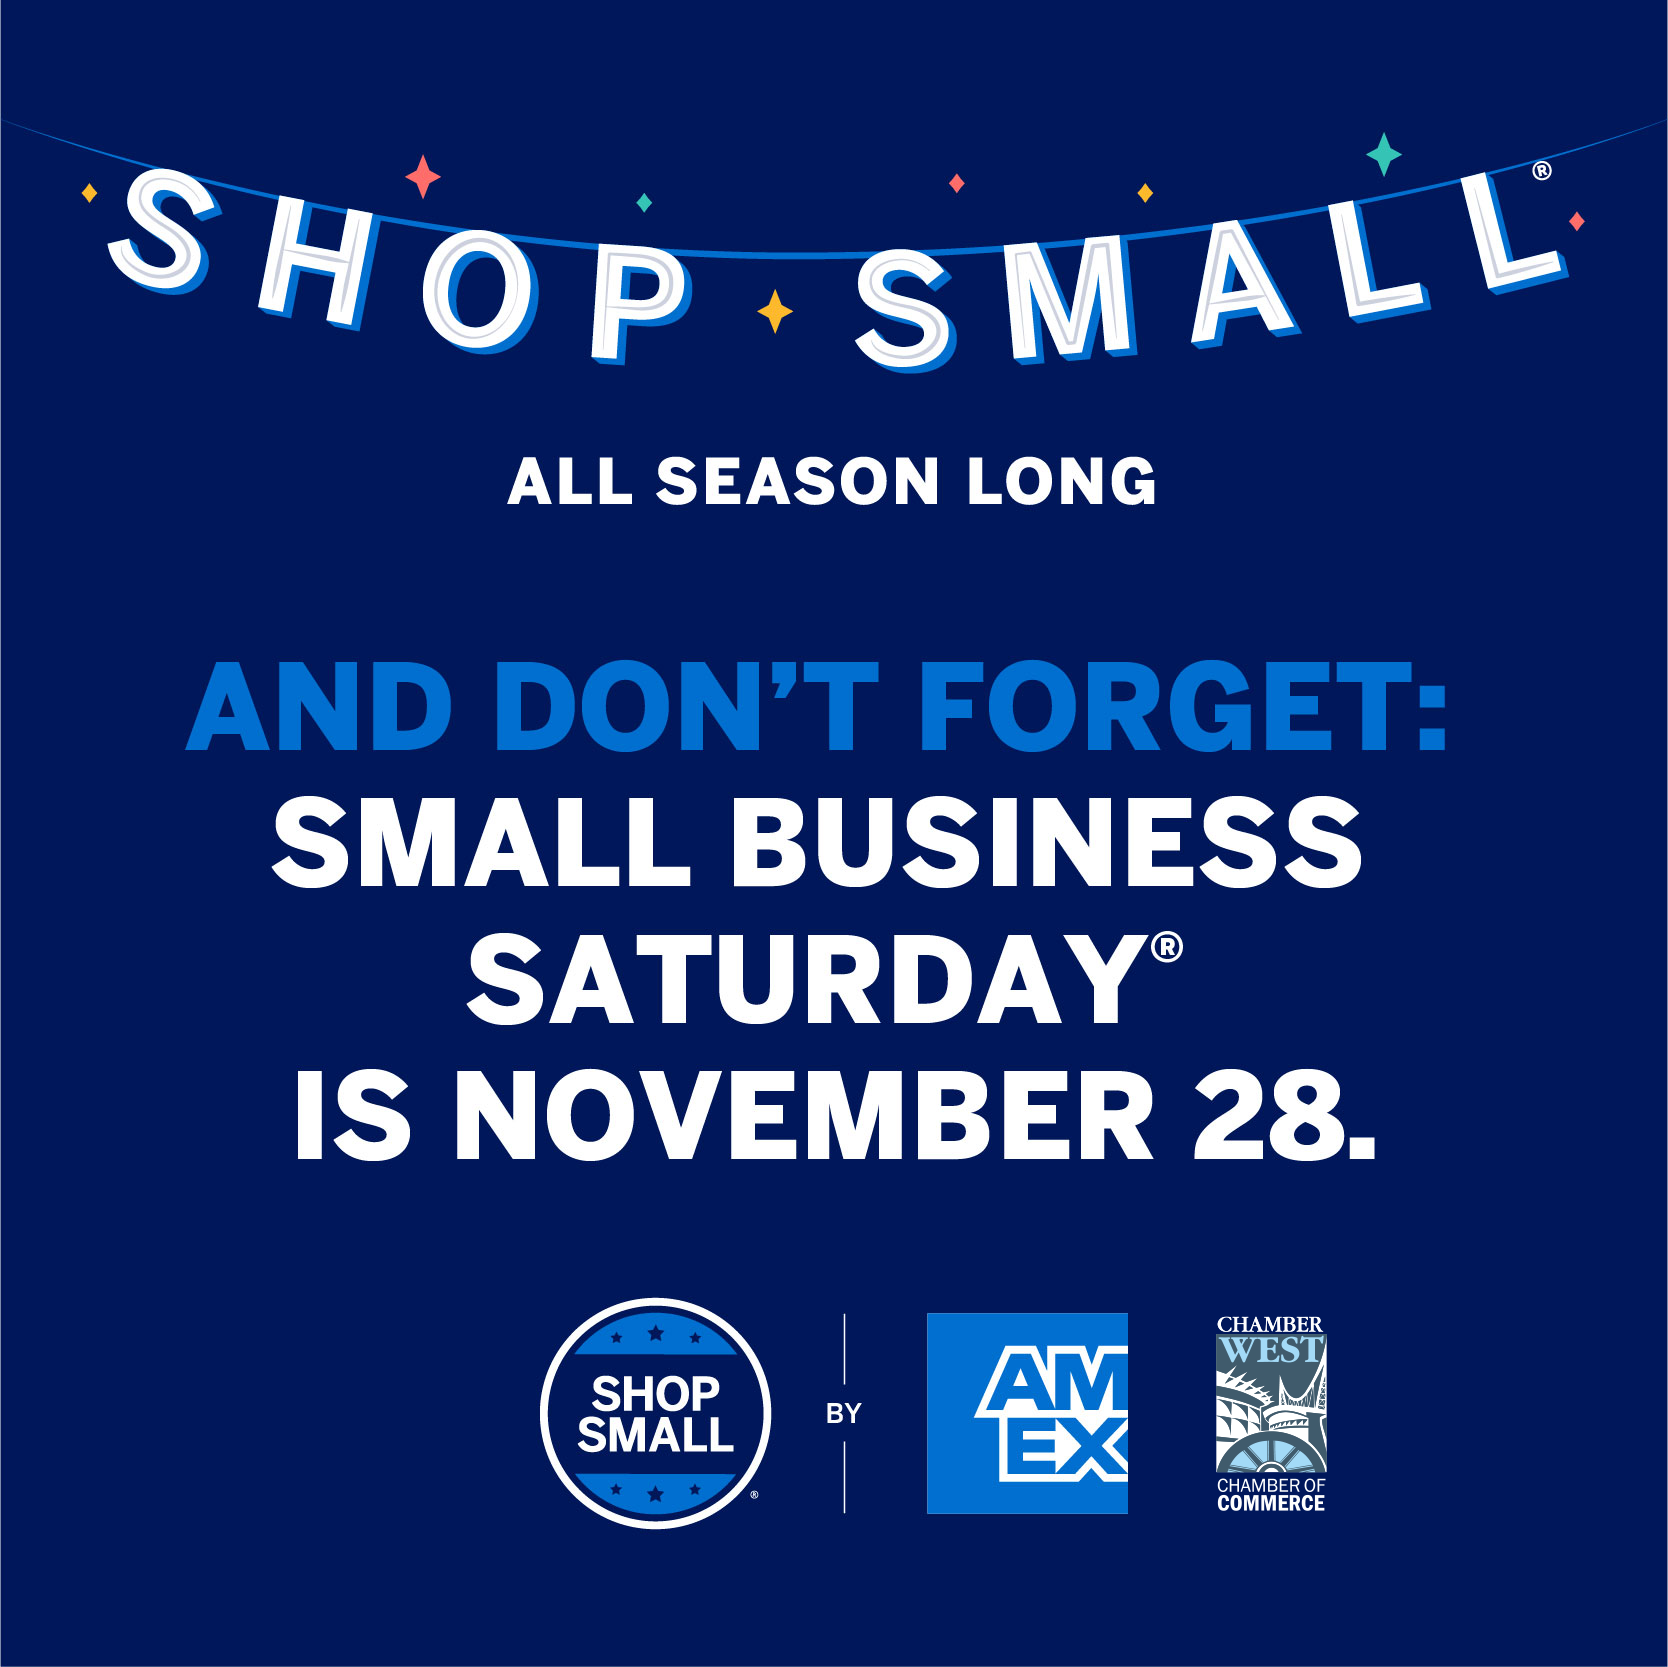 Celebrate the 2020 Holiday Season and 11th Annual Small Business Saturday®